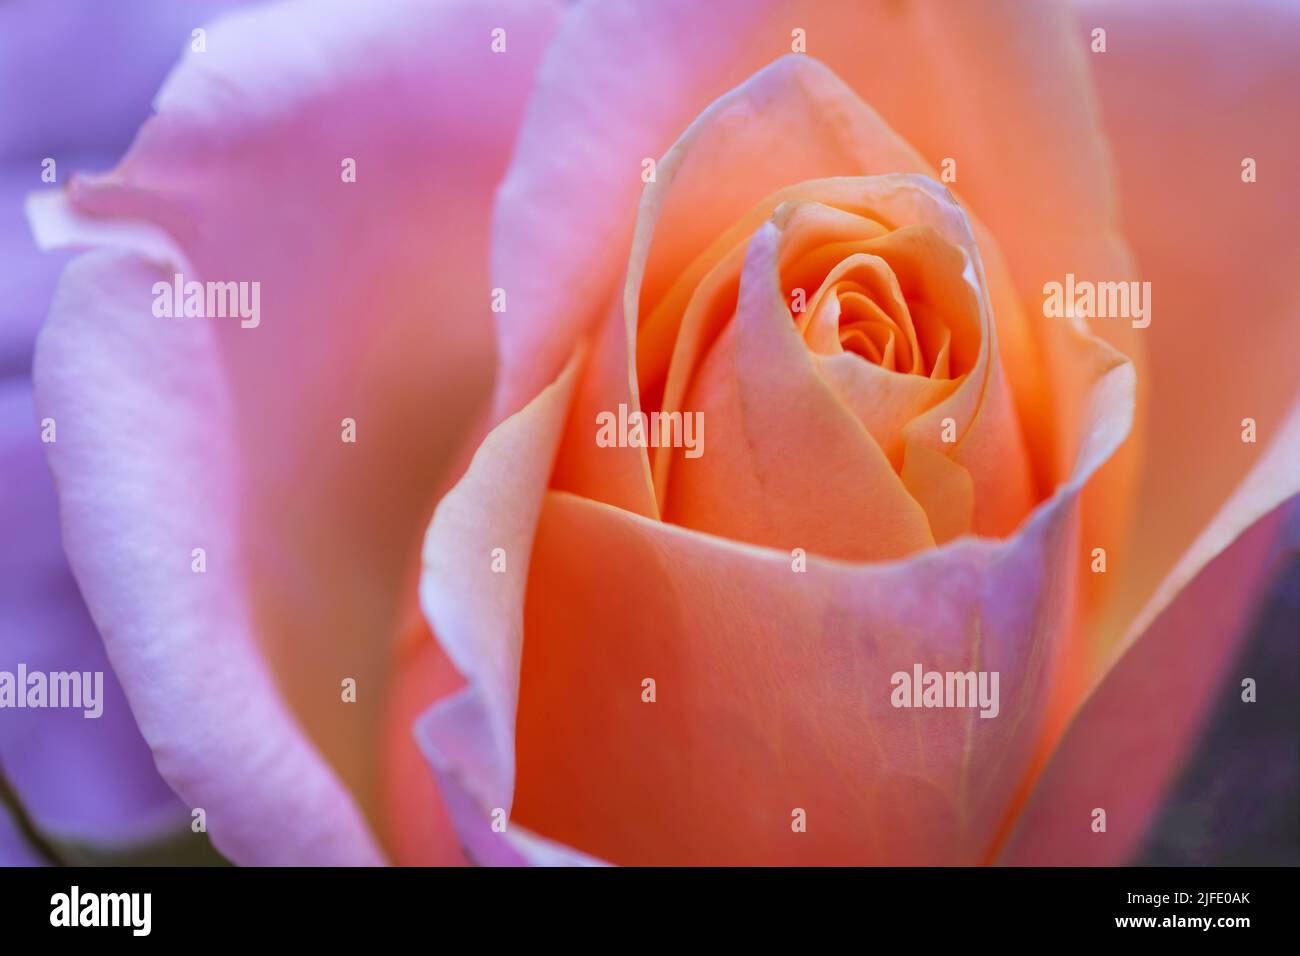 A close up of a beautiful apricot colored rose as it fades. Stock Photo